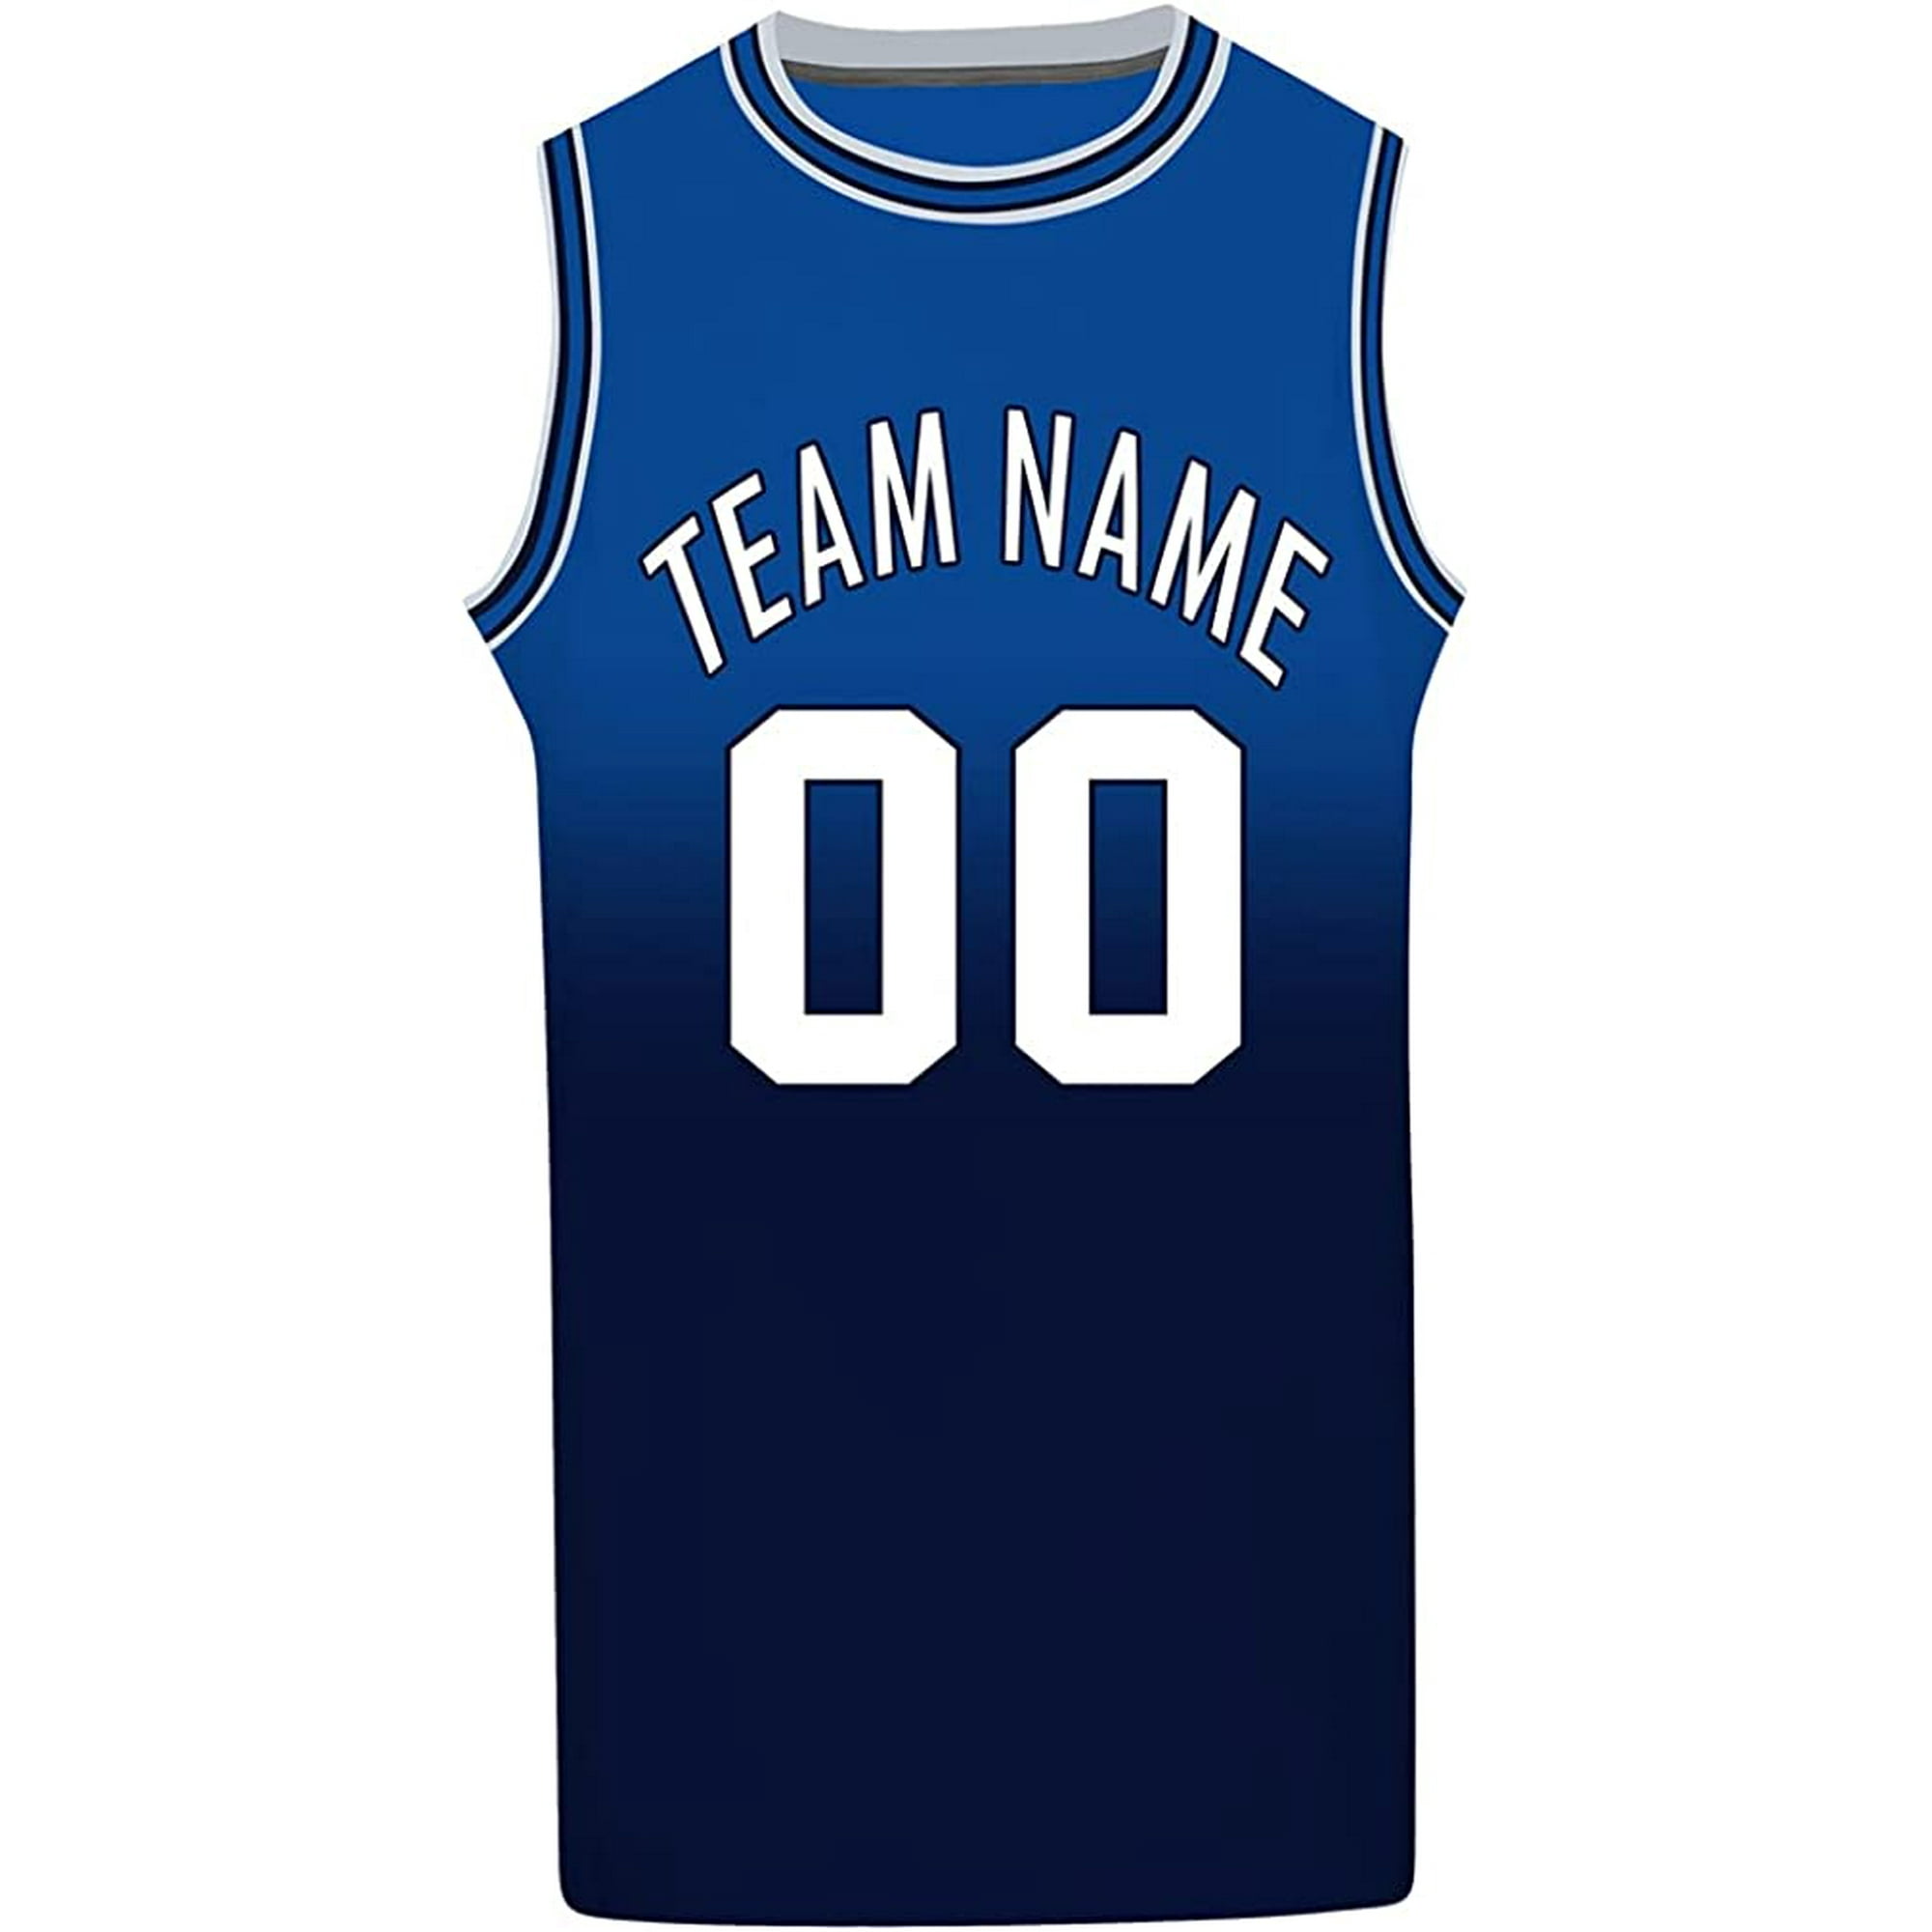 Custom Color Crash Gradient Basketball Jersey for Men Women Youth Design  Your Own Stitched/Printed Letters and Numbers 